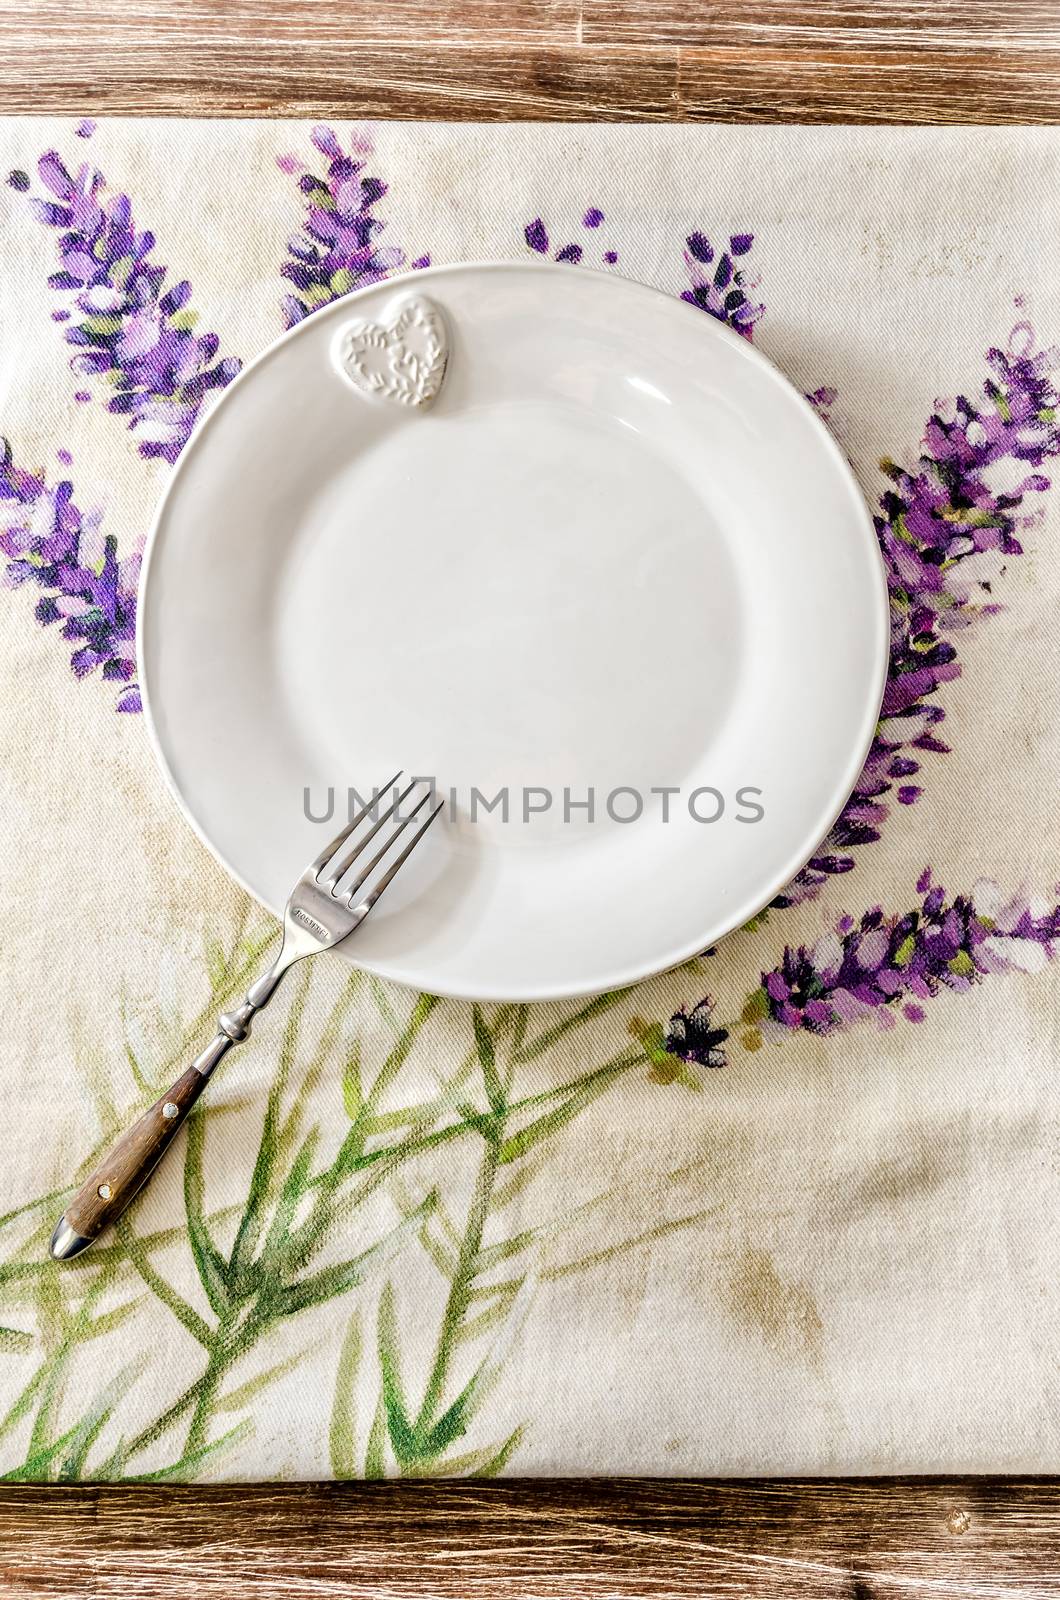 Plate and fork on vintage wooden dining table with colorful tablecloth